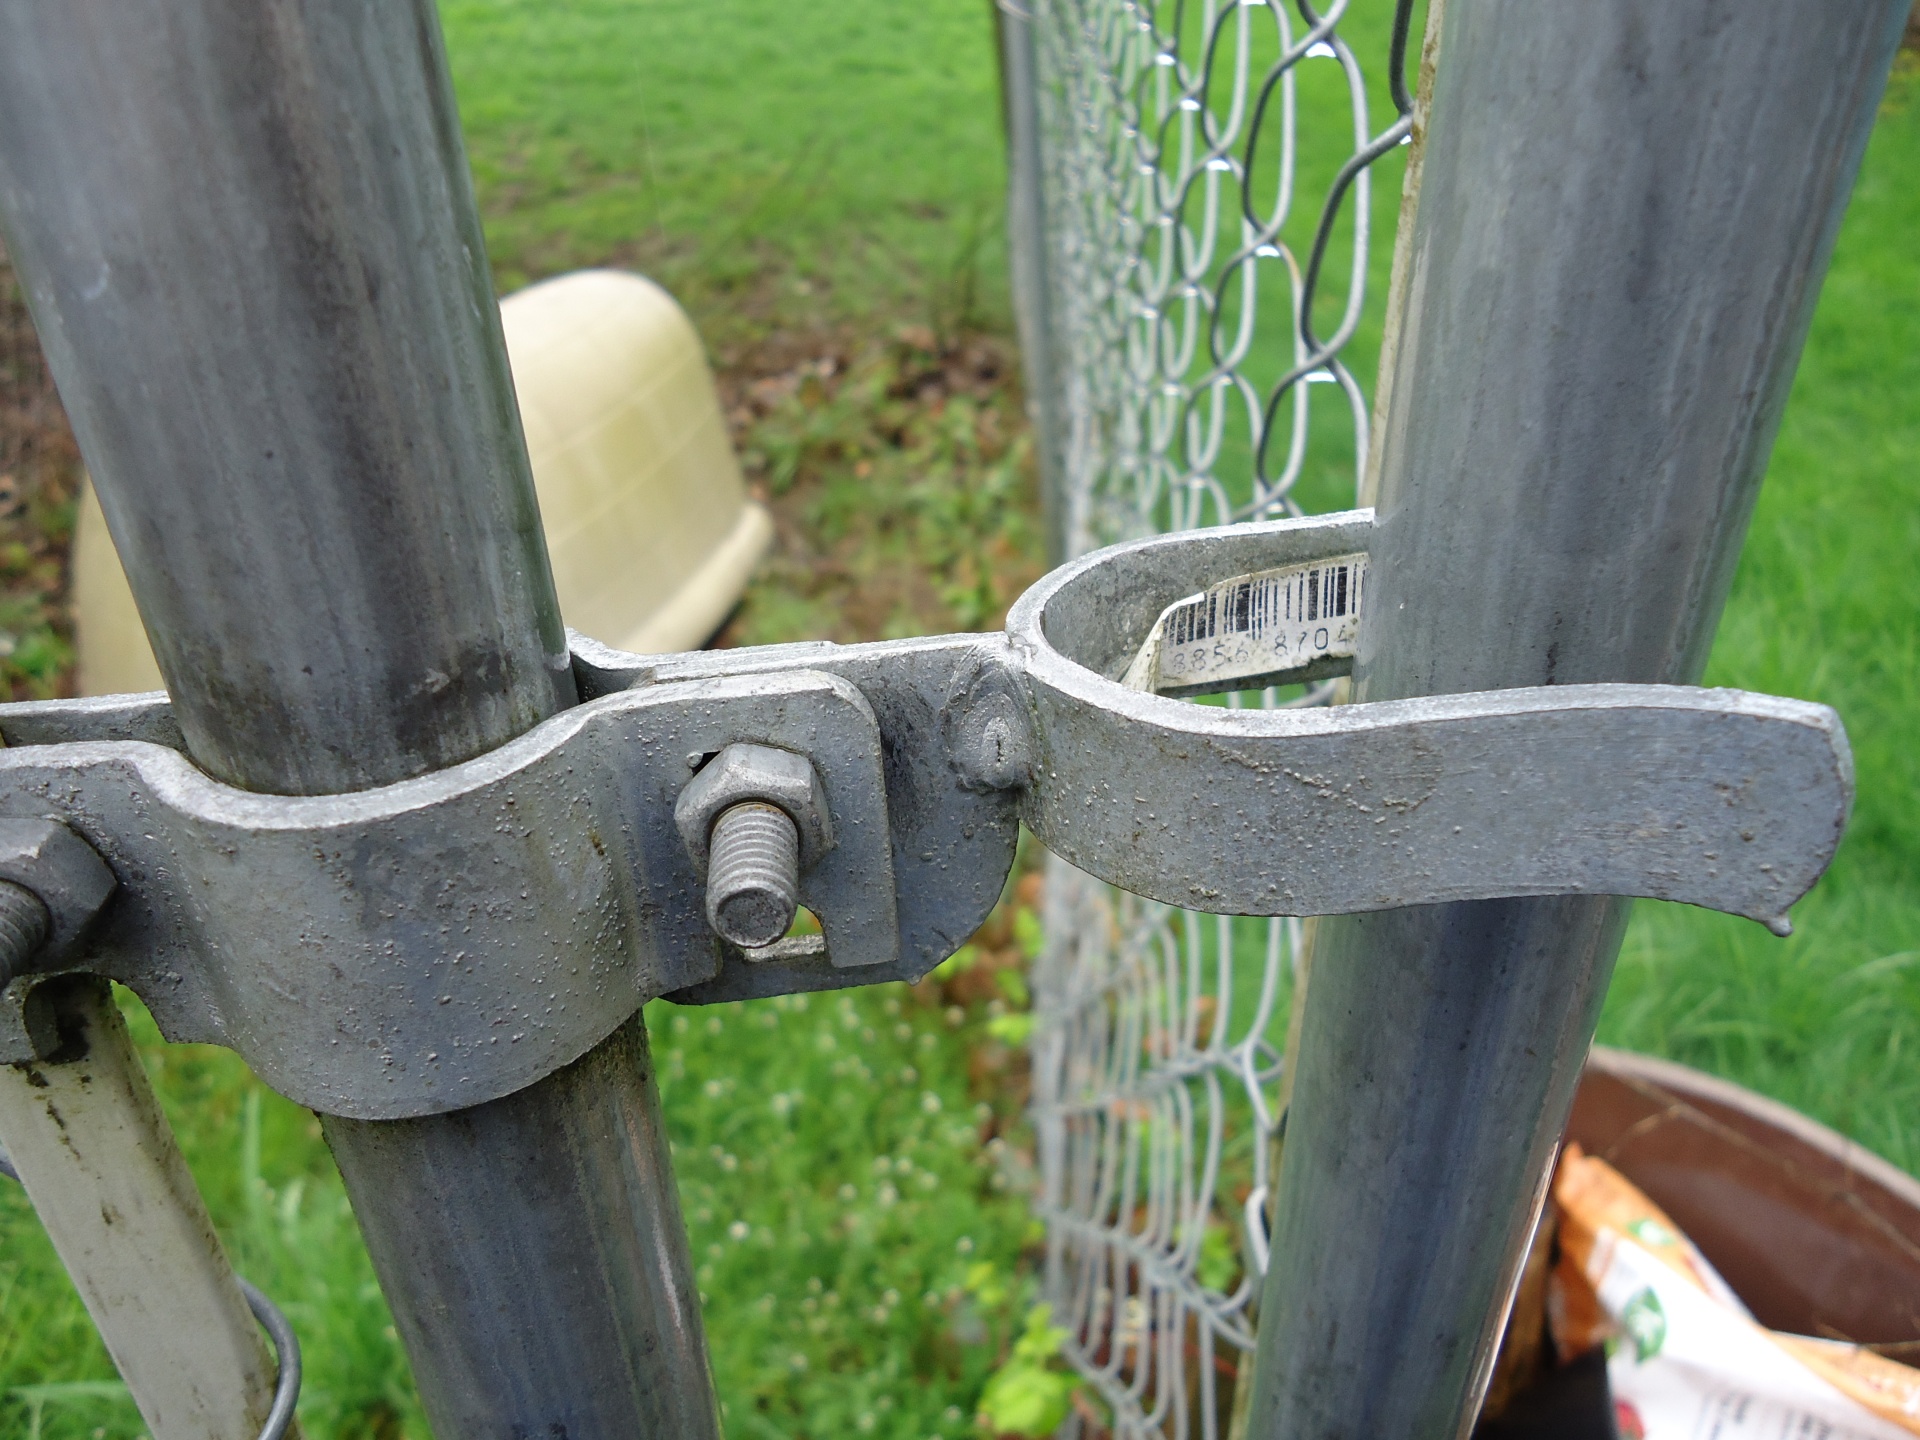 Fence gate fork latch for a chain link fence